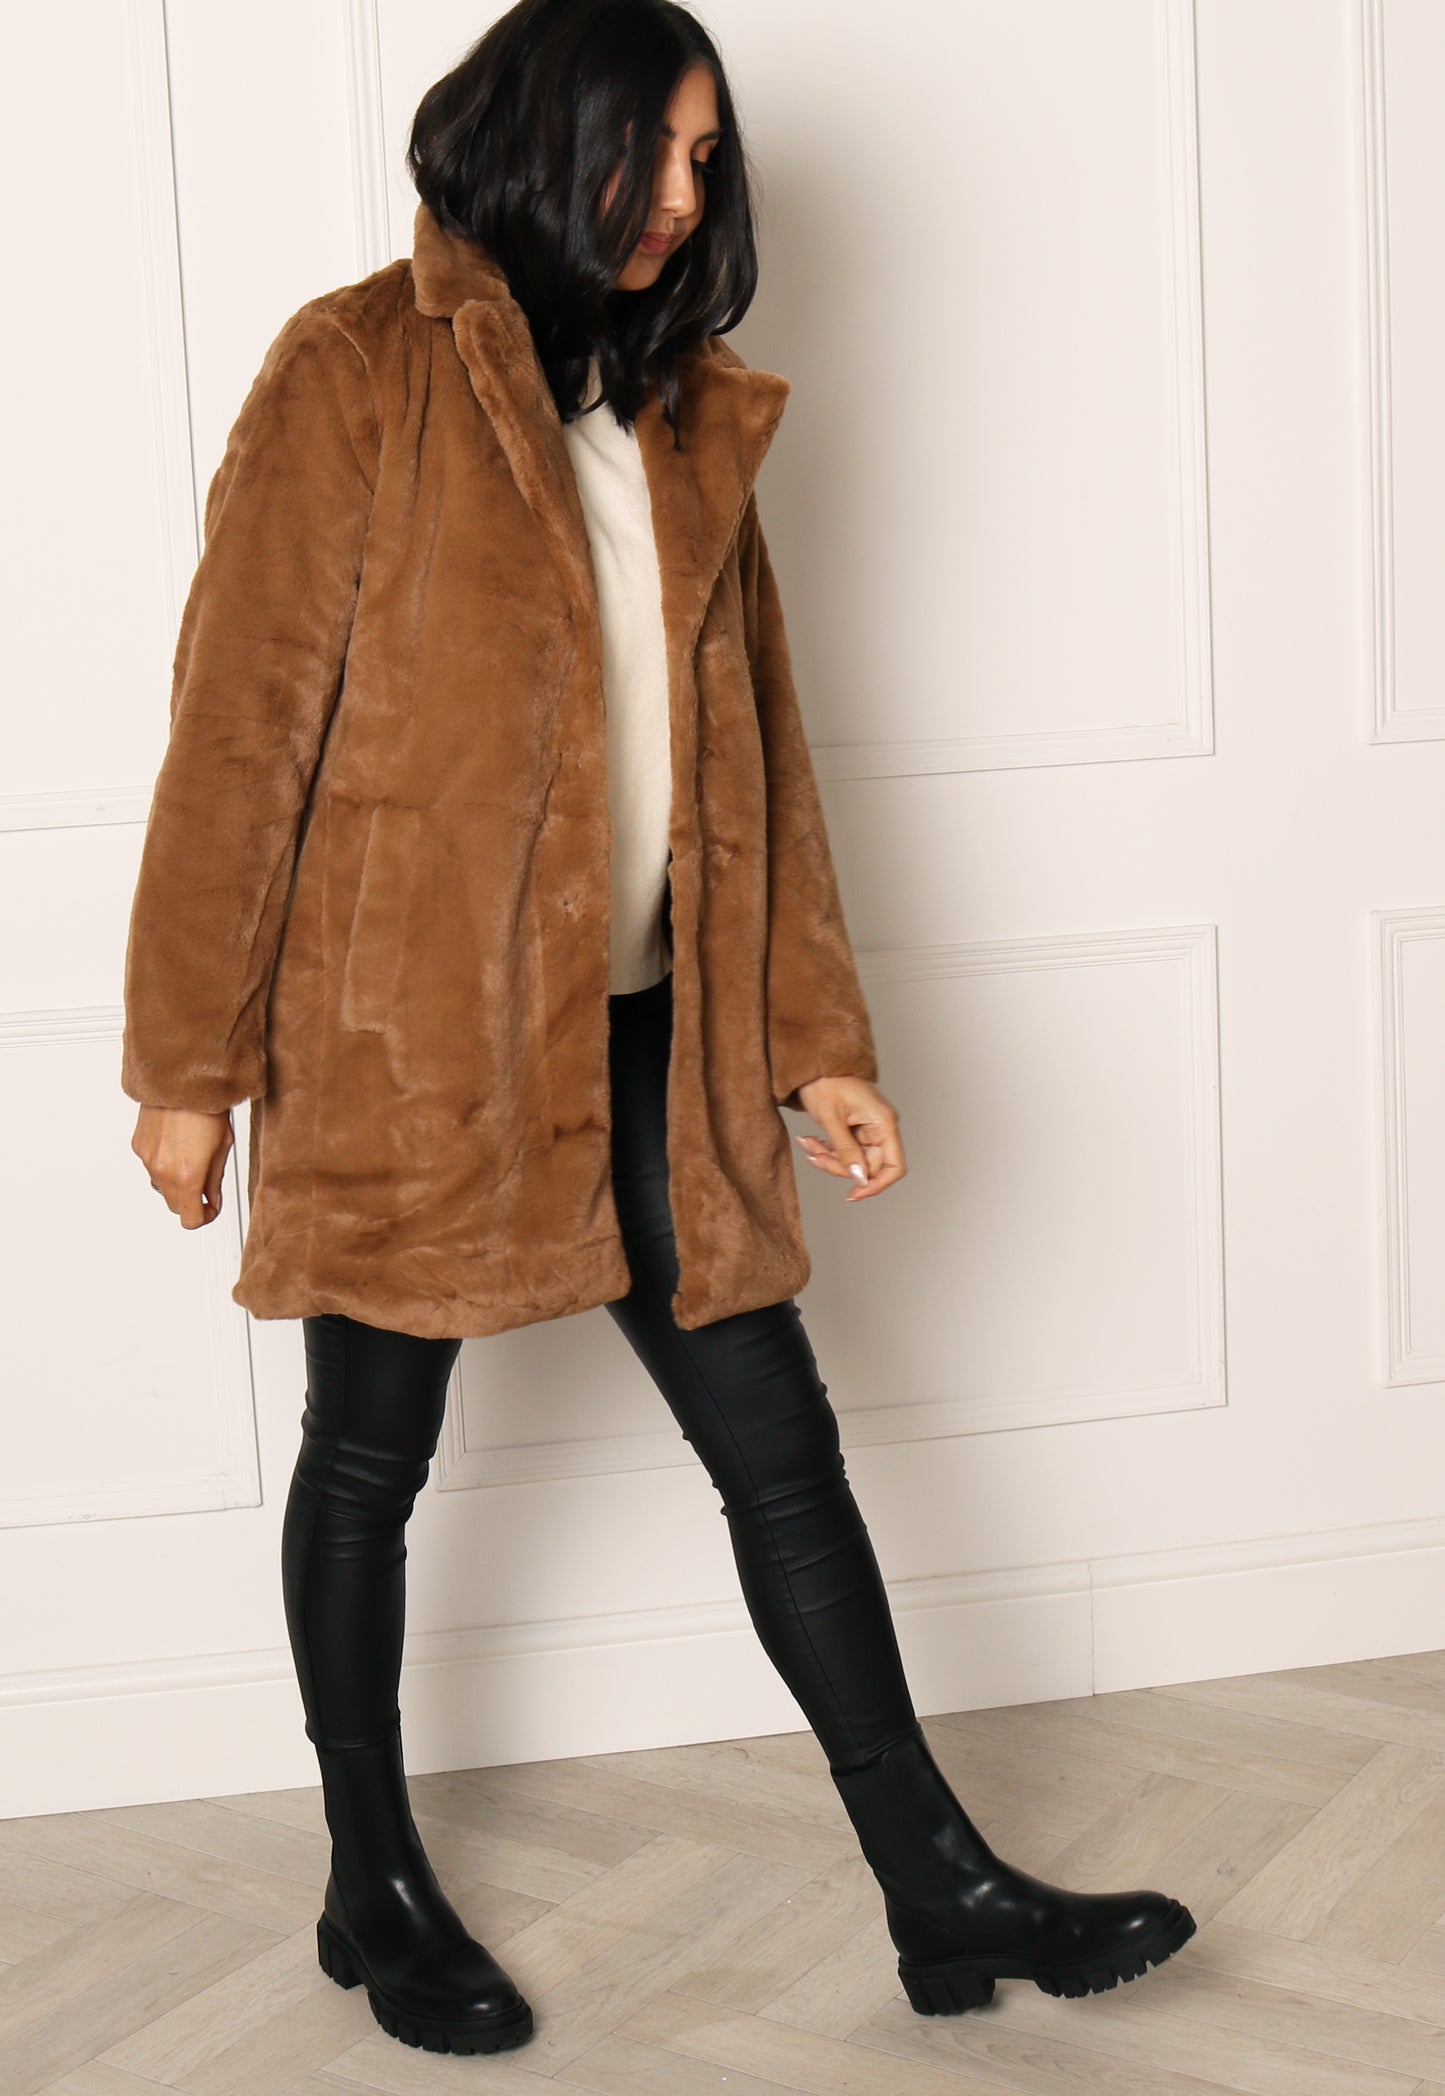 VILA Ebba Vintage Style Faux Fur Midi Coat with Collar in Light Brown - One Nation Clothing